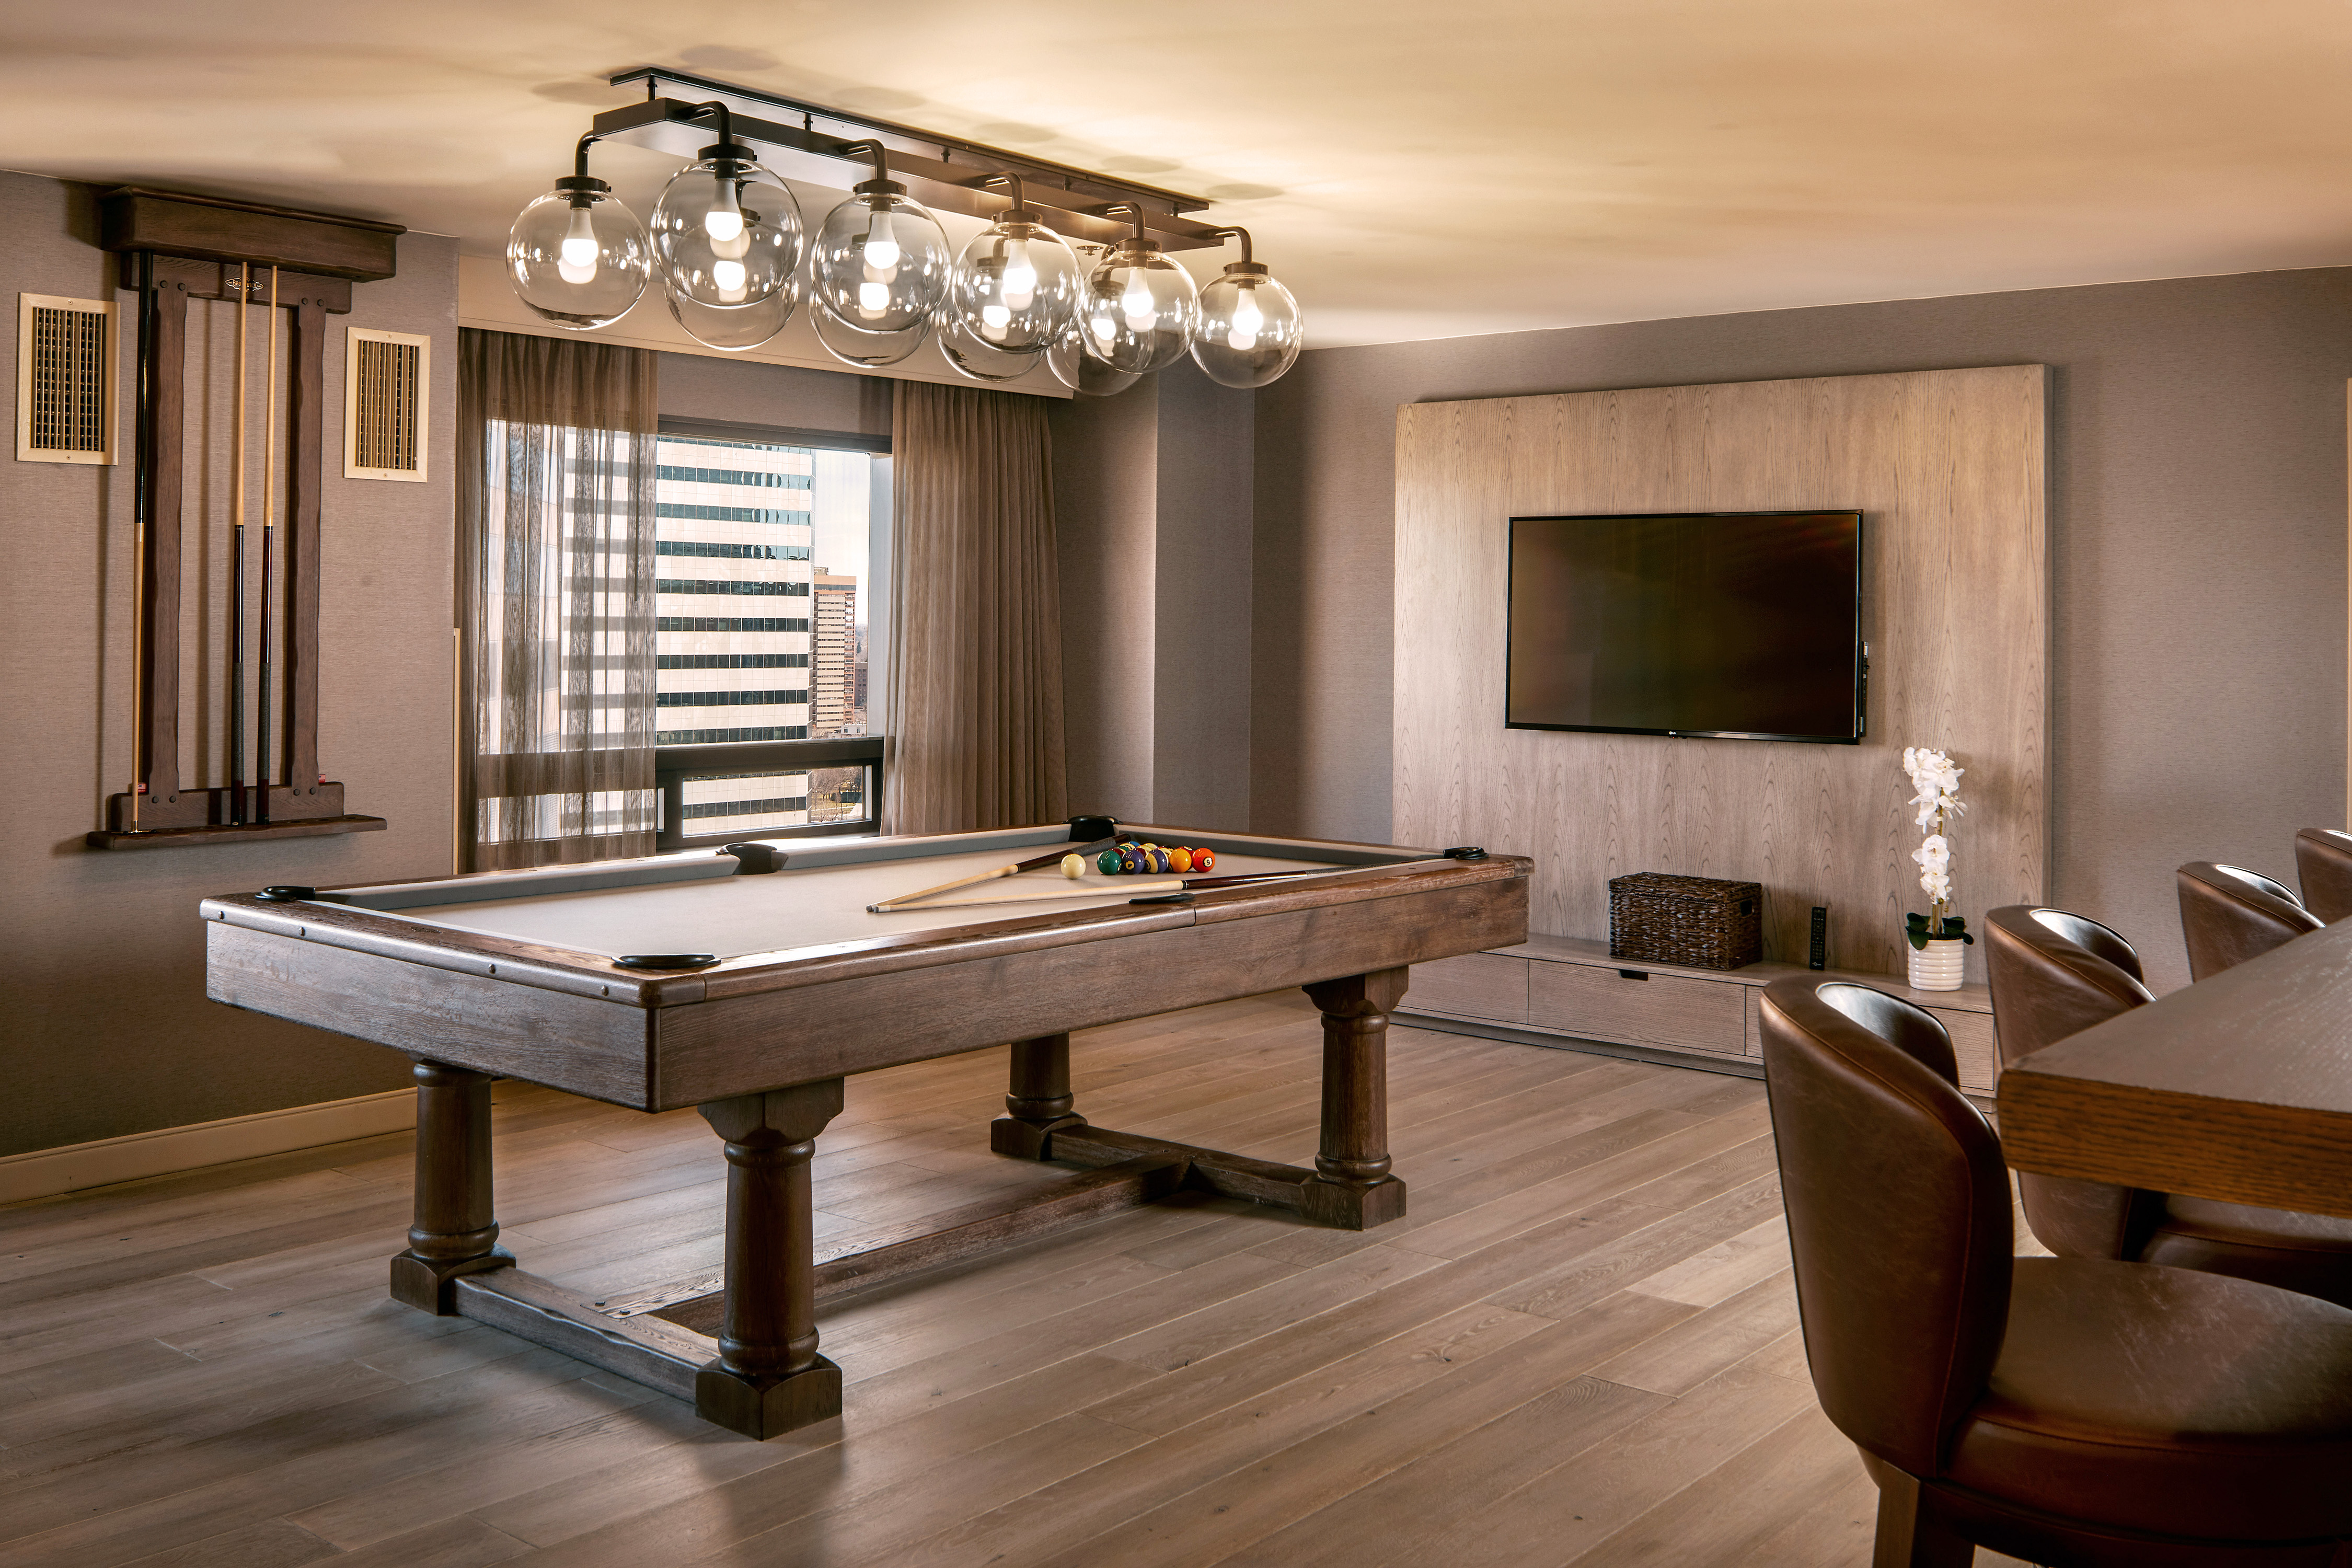 Presidential Suite With Pool Table